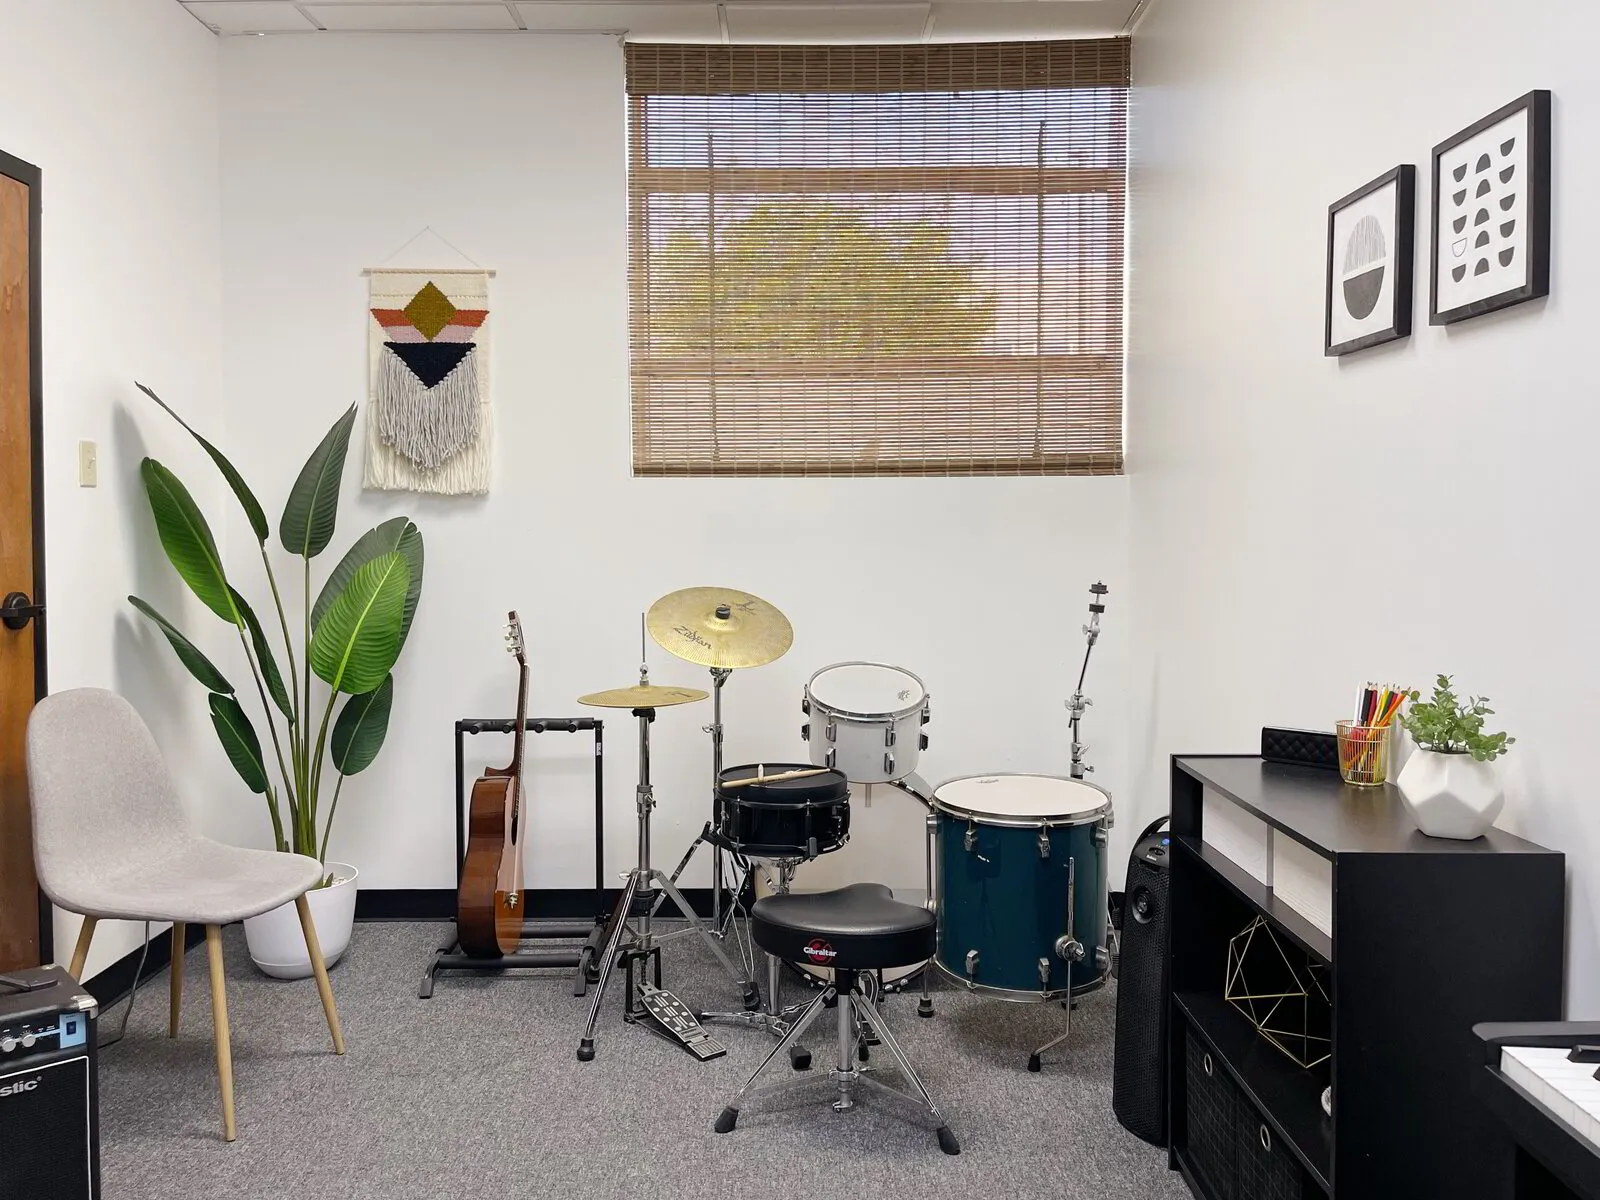 NOLA School of Music studio lesson room at our Bienville location.